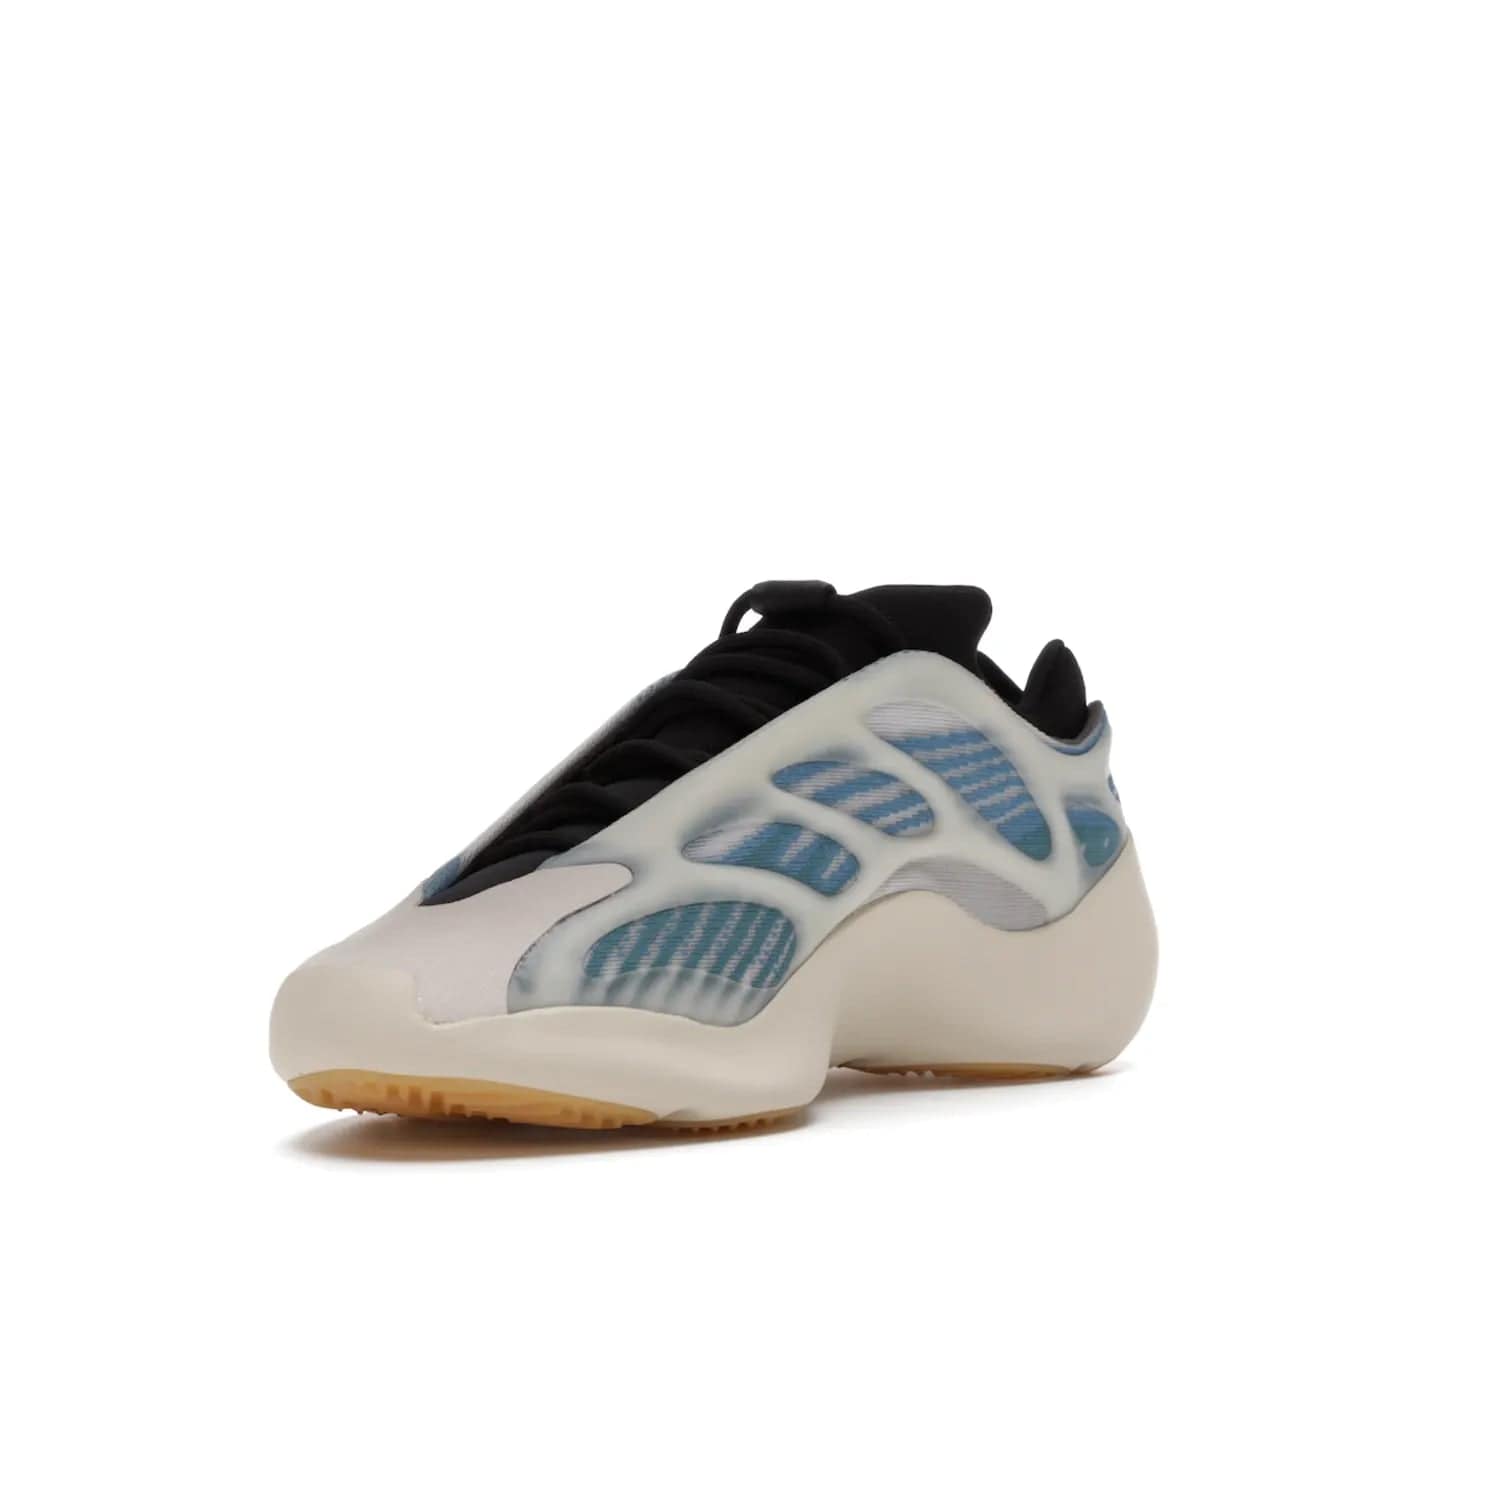 adidas Yeezy 700 V3 Kyanite - Image 14 - Only at www.BallersClubKickz.com - The adidas Yeezy 700 V3 Kyanite offers a layered design featuring a glow-in-the-dark TPU cage and a tonal cream-colored EVA foam midsole. With its herringbone-patterned outsole, the style and comfort of the sneaker will accompany you anywhere. Released in March 2021, it's a great addition to any sneaker wardrobe.